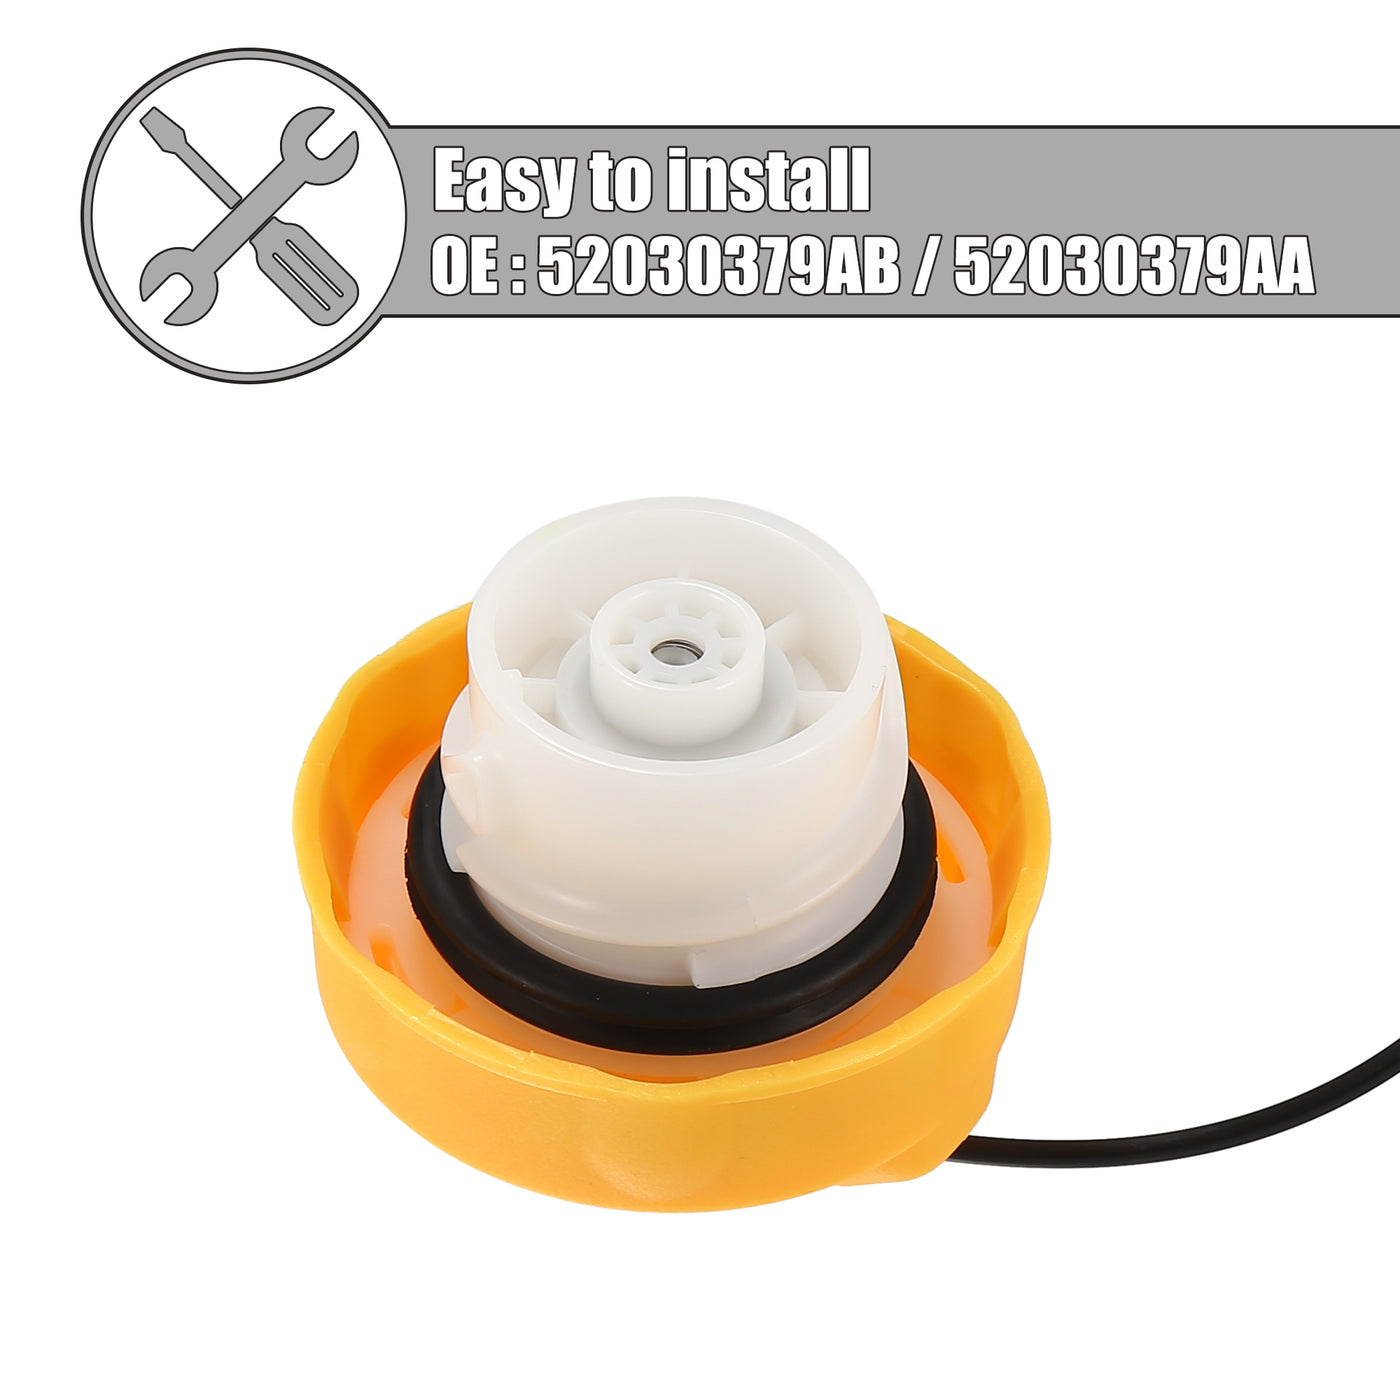 X AUTOHAUX 52030379AB 52030379AA Engine Fuel Tank Cap Gas Cap Cover for Dodge Durango 2011-2013 for Dodge Journey 2011-2019 for Jeep Cherokee 2014-2017